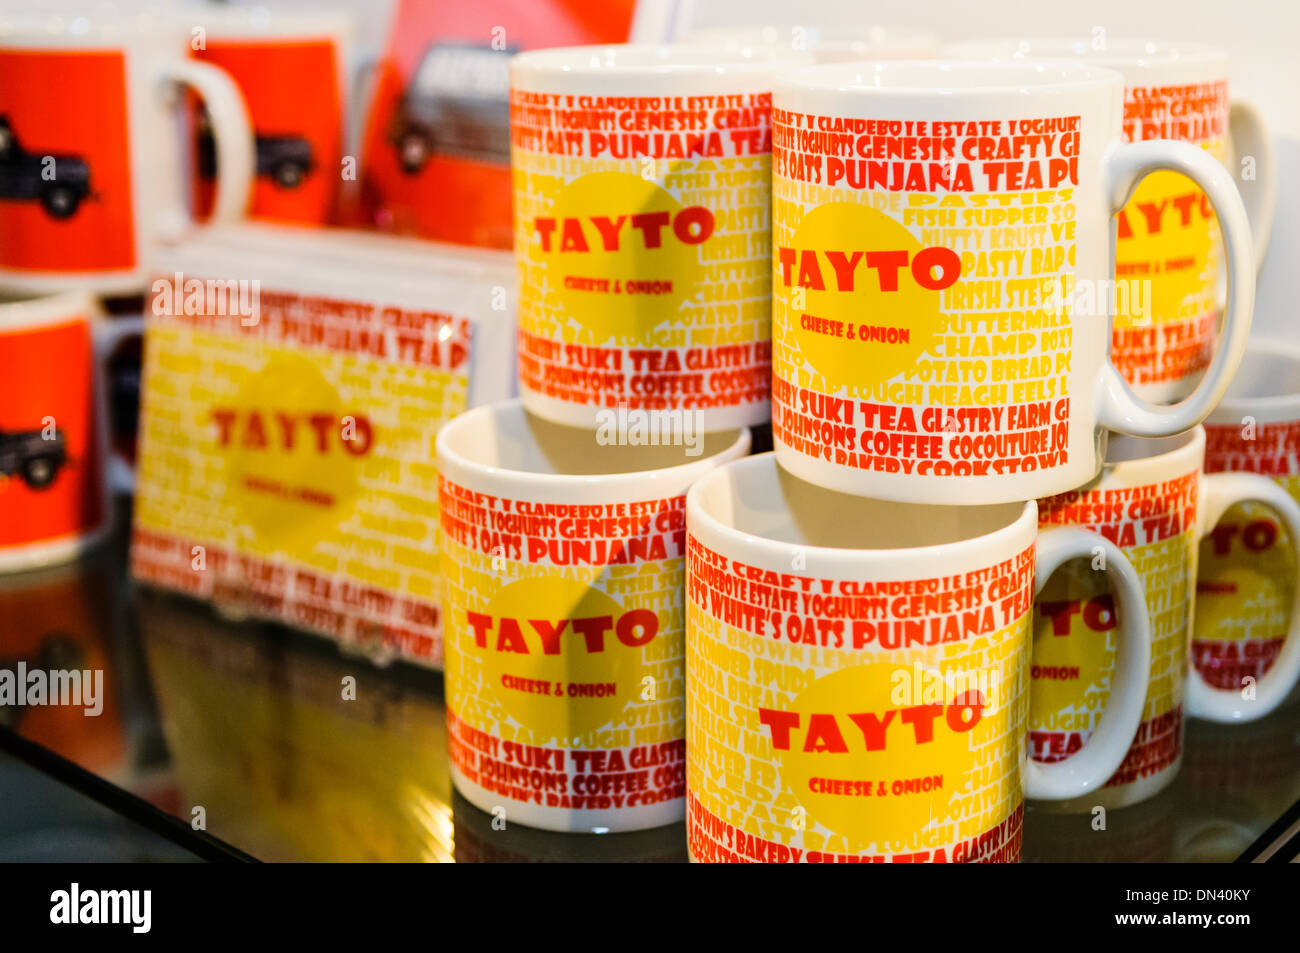 Tayto branded mugs on sale in a souvenir shop in Belfast, Northern Ireland Stock Photo